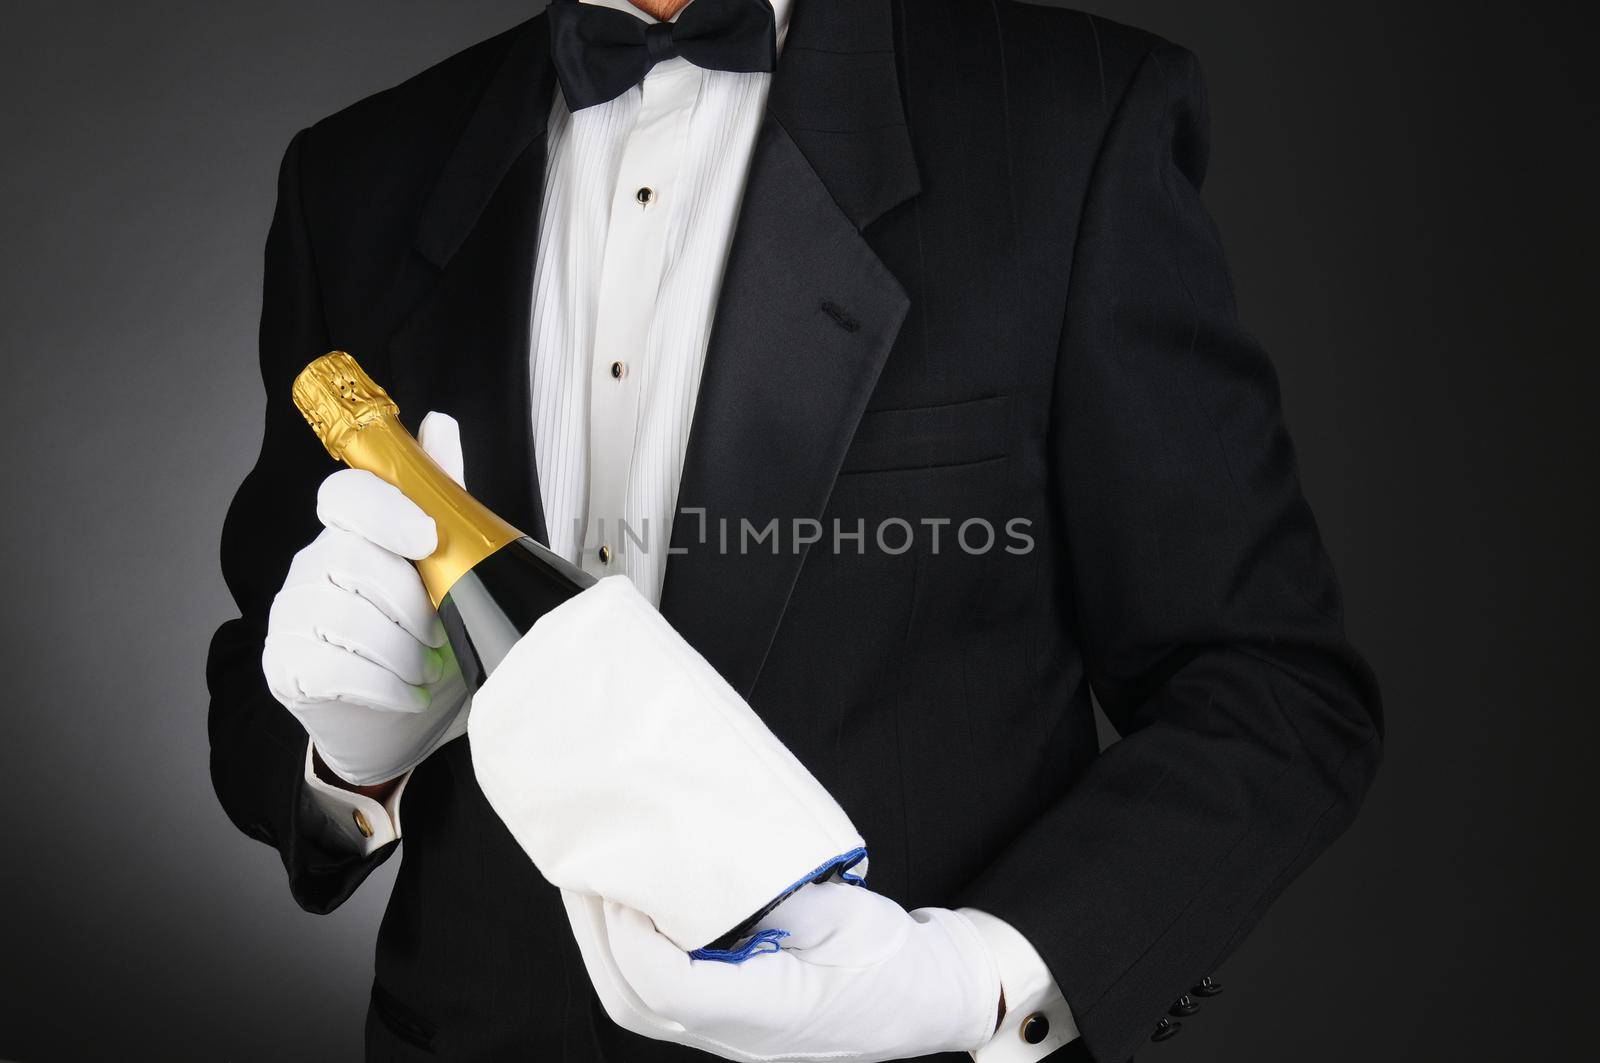 Closeup of a Sommelier holding a Champagne bottle in front of his torso. Man is unrecognizable. Horizontal format on a light to dark gray background.